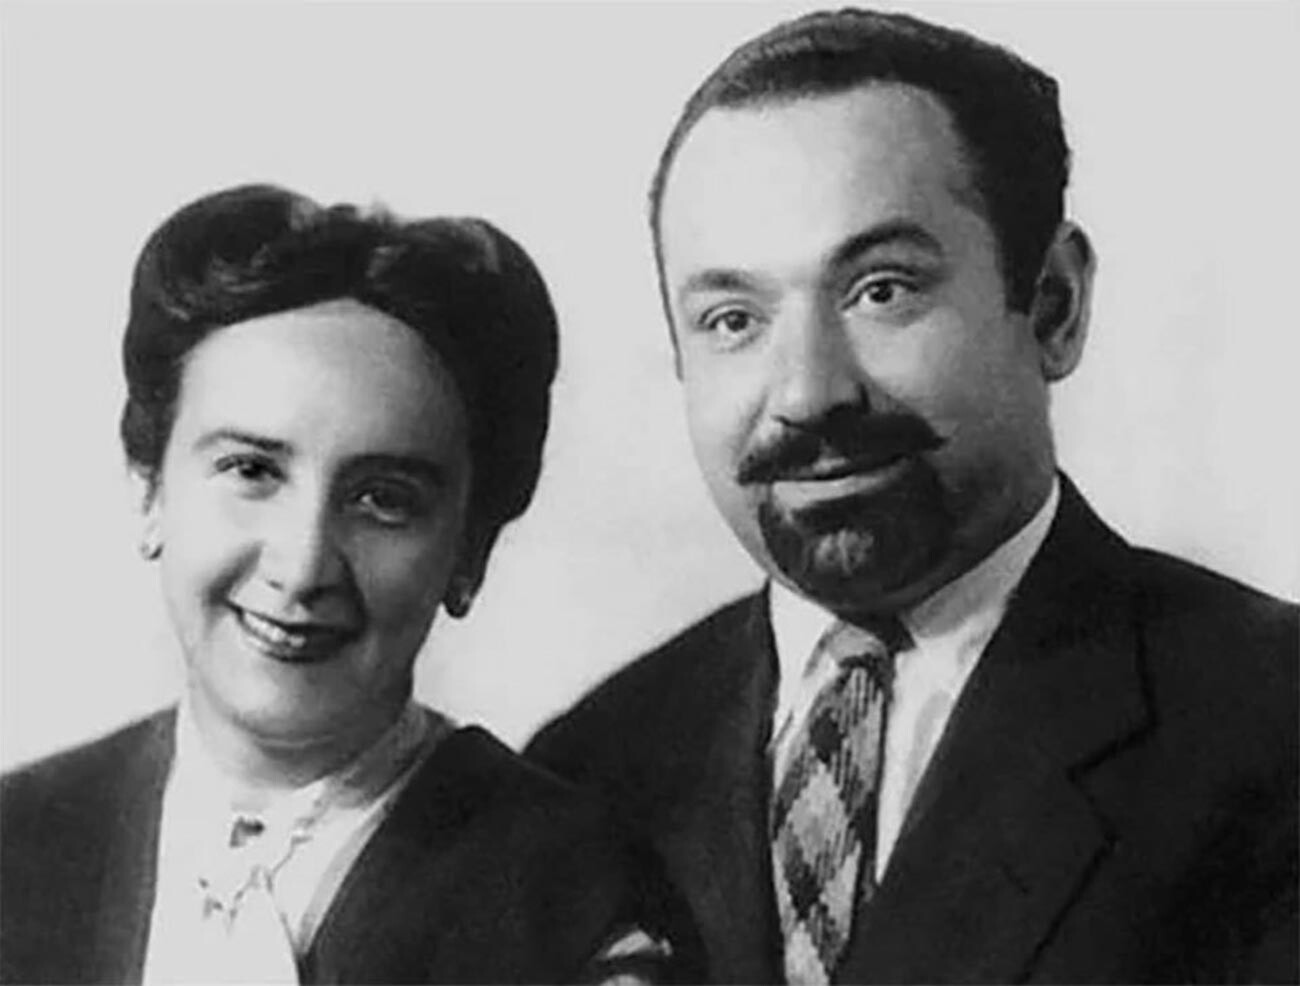 Grigulevich (Castro) and his wife during their stay in Brazil in 1946.